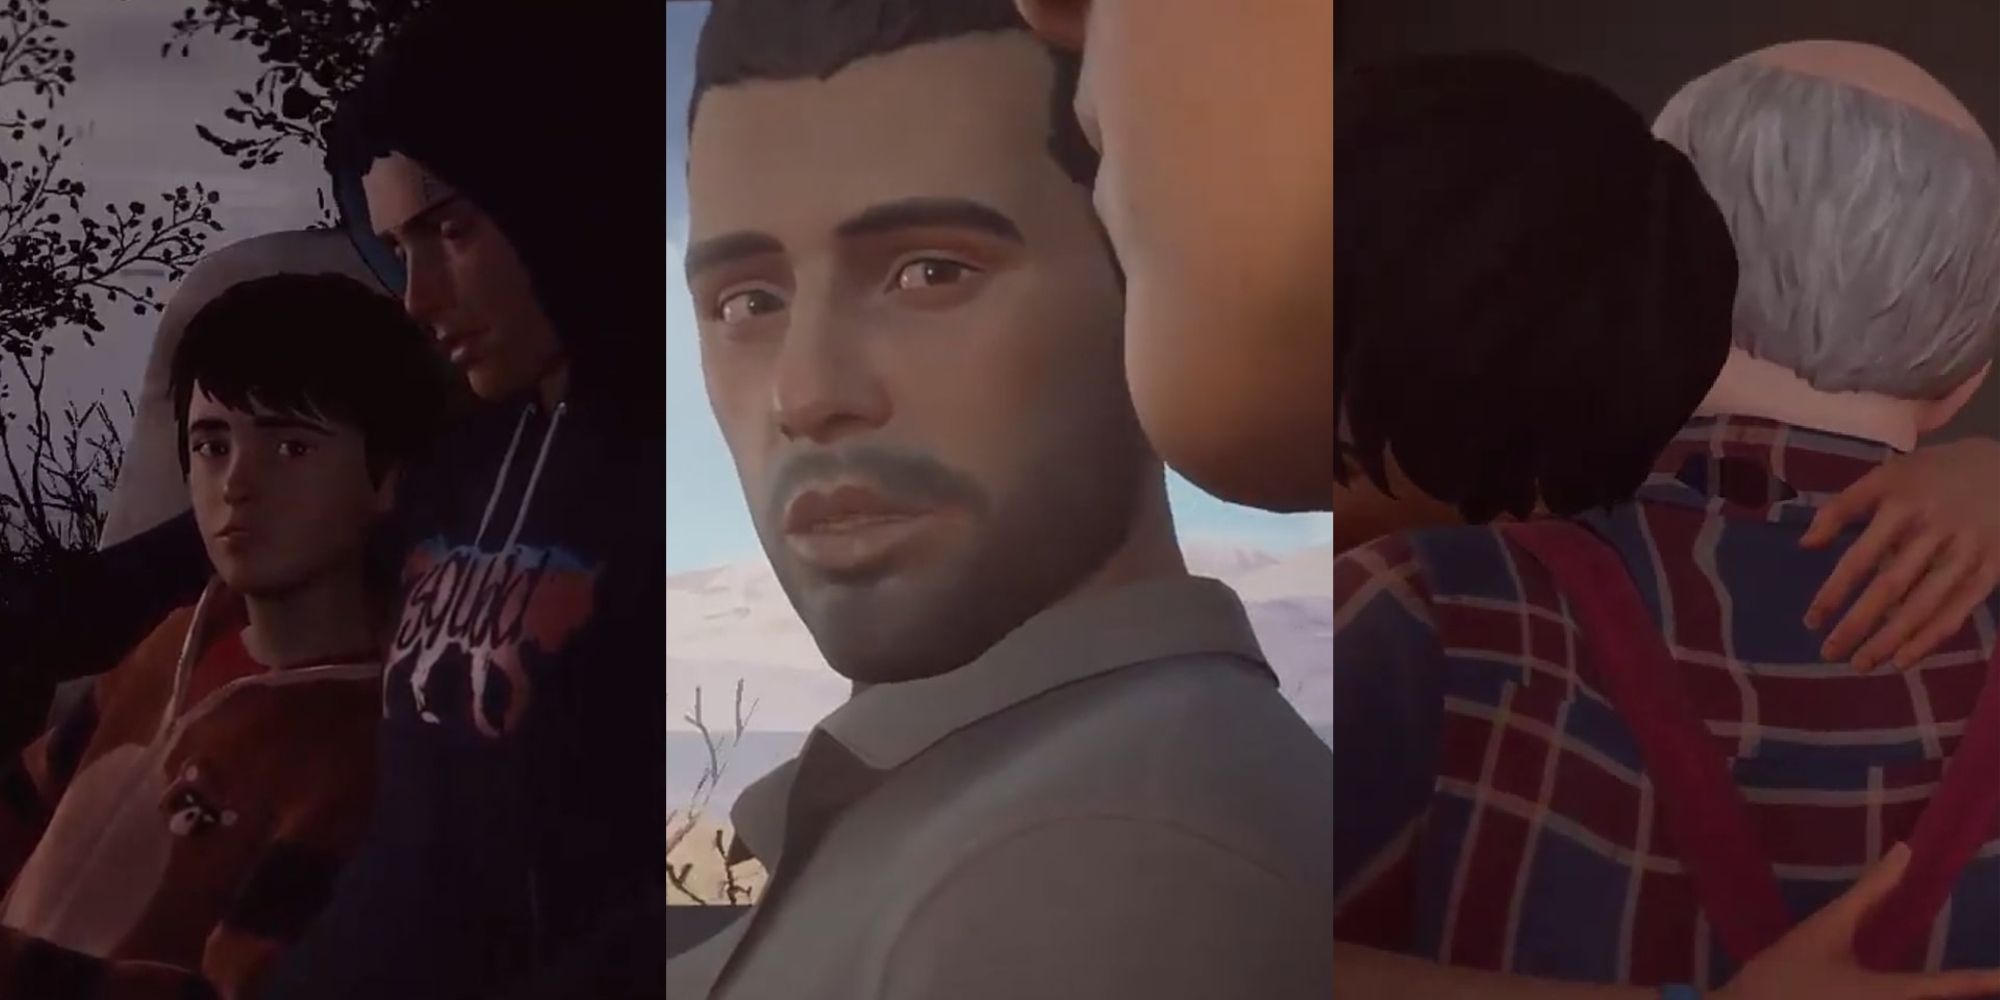 A split image collage of Sean and Daniel leaning in close to each other on a bus, Sean's dad speaking with him in a dream, and Daniel hugging his grandfather in Life is Strange 2..